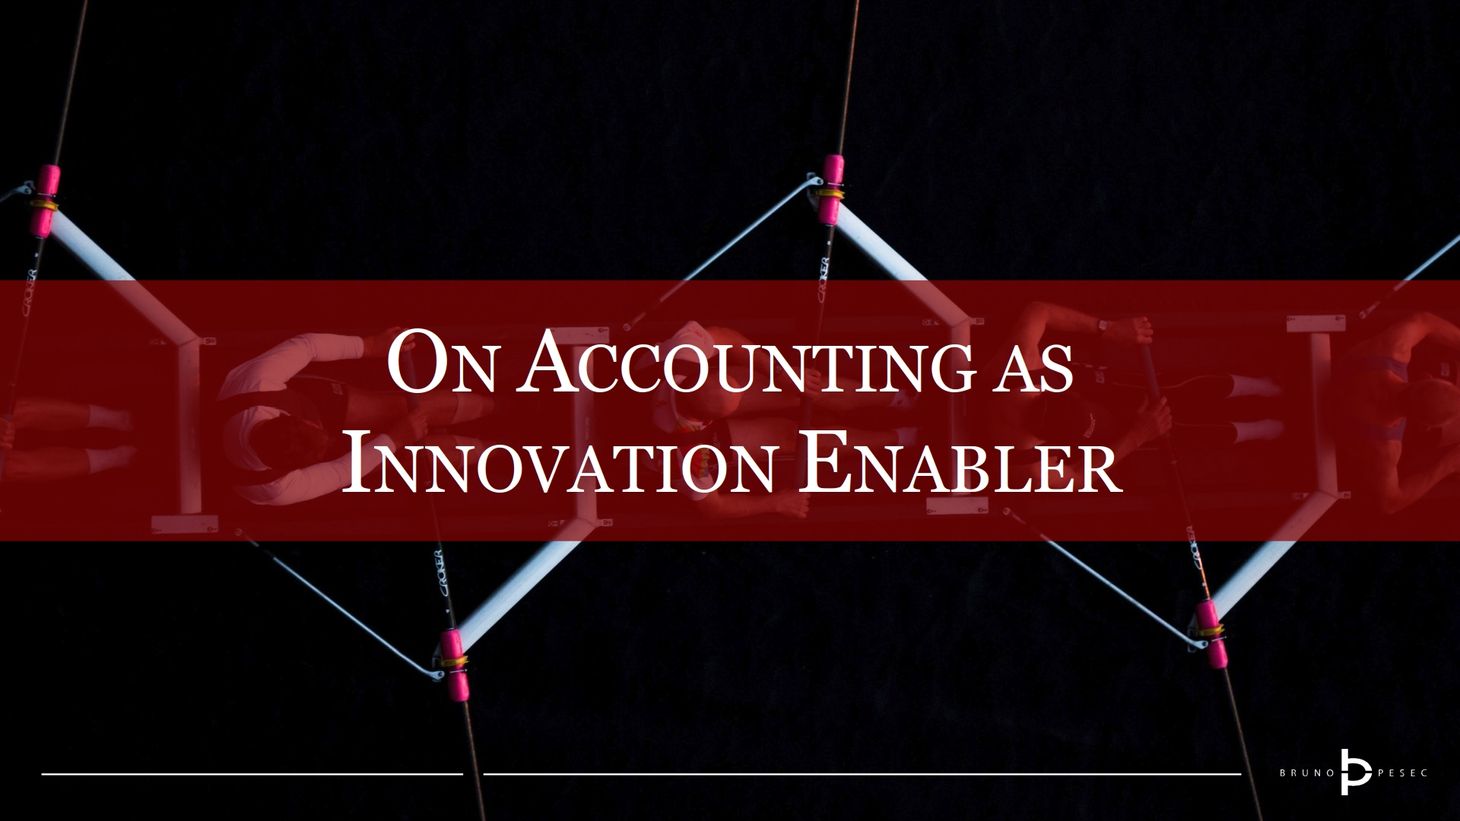 On accounting as innovation enabler